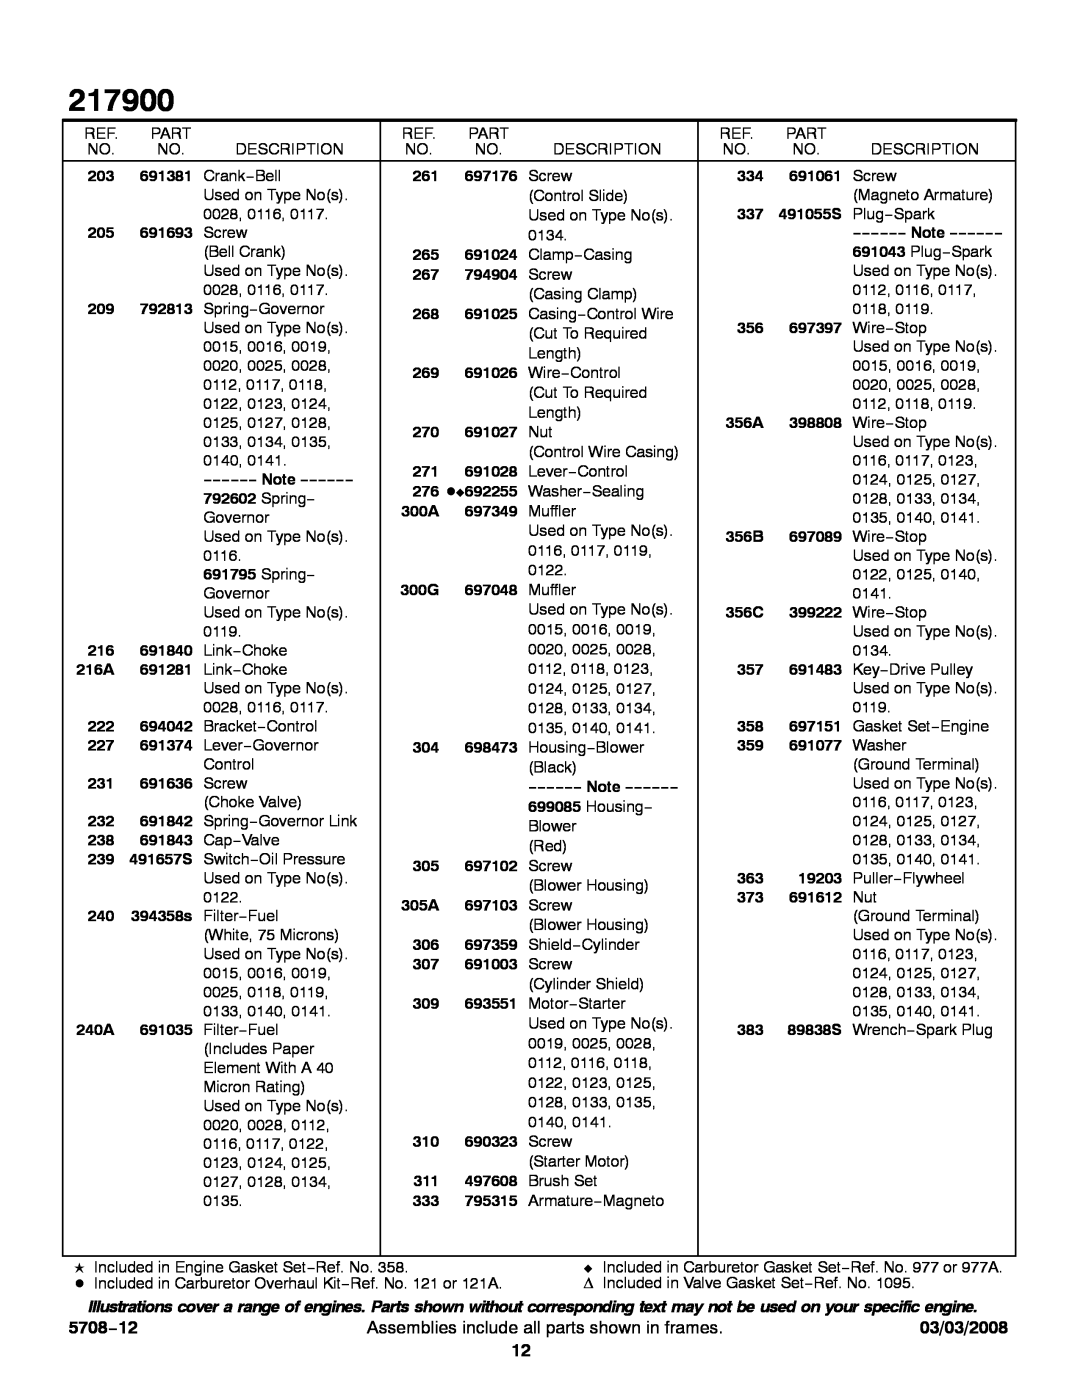 Briggs & Stratton 217900 service manual 5708−12, Assemblies include all parts shown in frames, 03/03/2008 